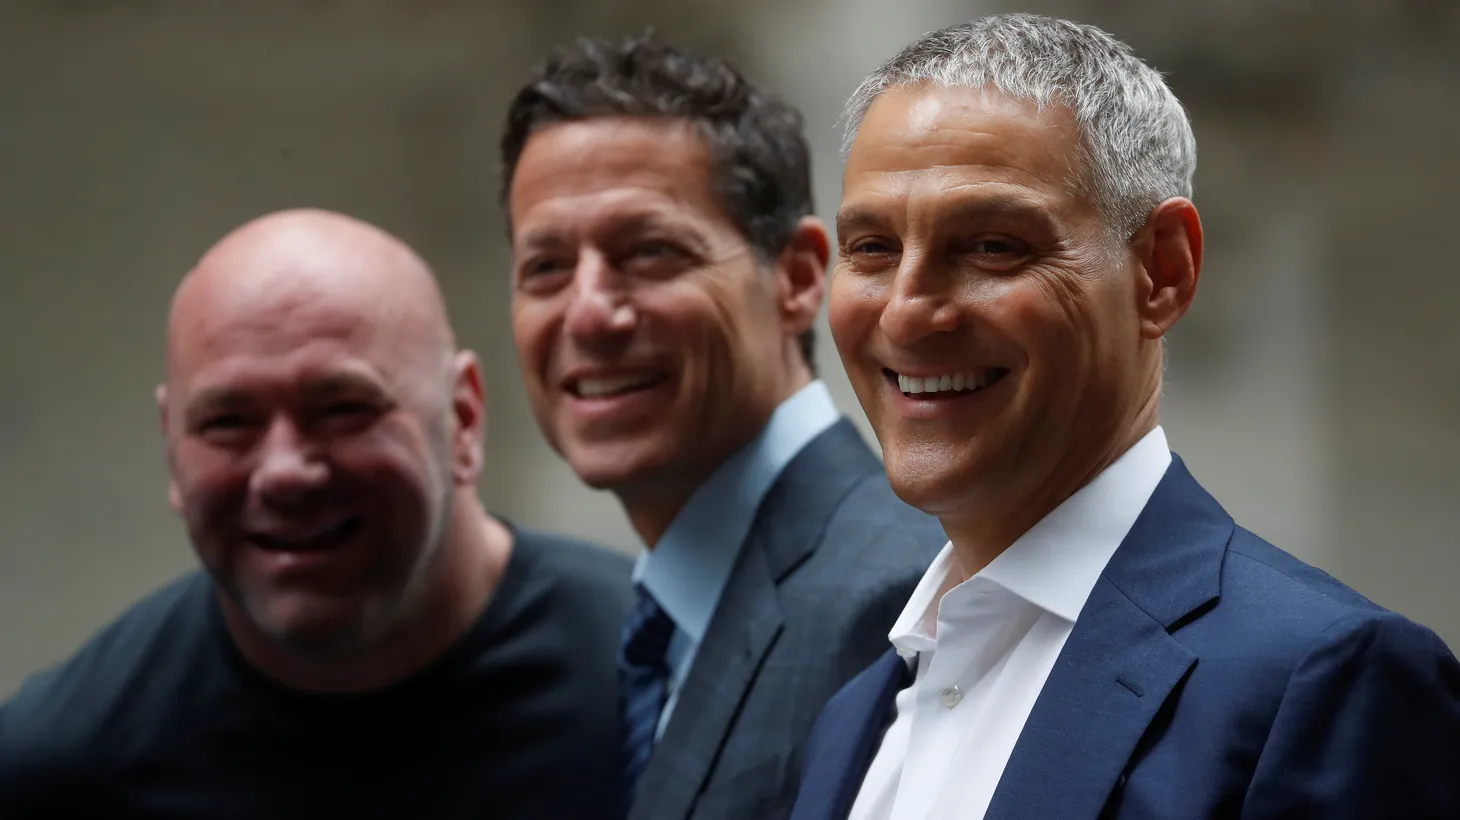 Ari Emanuel (right), Hollywood mogul and the CEO of Endeavor Group Holdings Inc., stands next to Endeavor President Mark Shapiro and UFC President Dana White (left) before the public listing of EDR on the NYSE in New York City, on April 29, 2021.